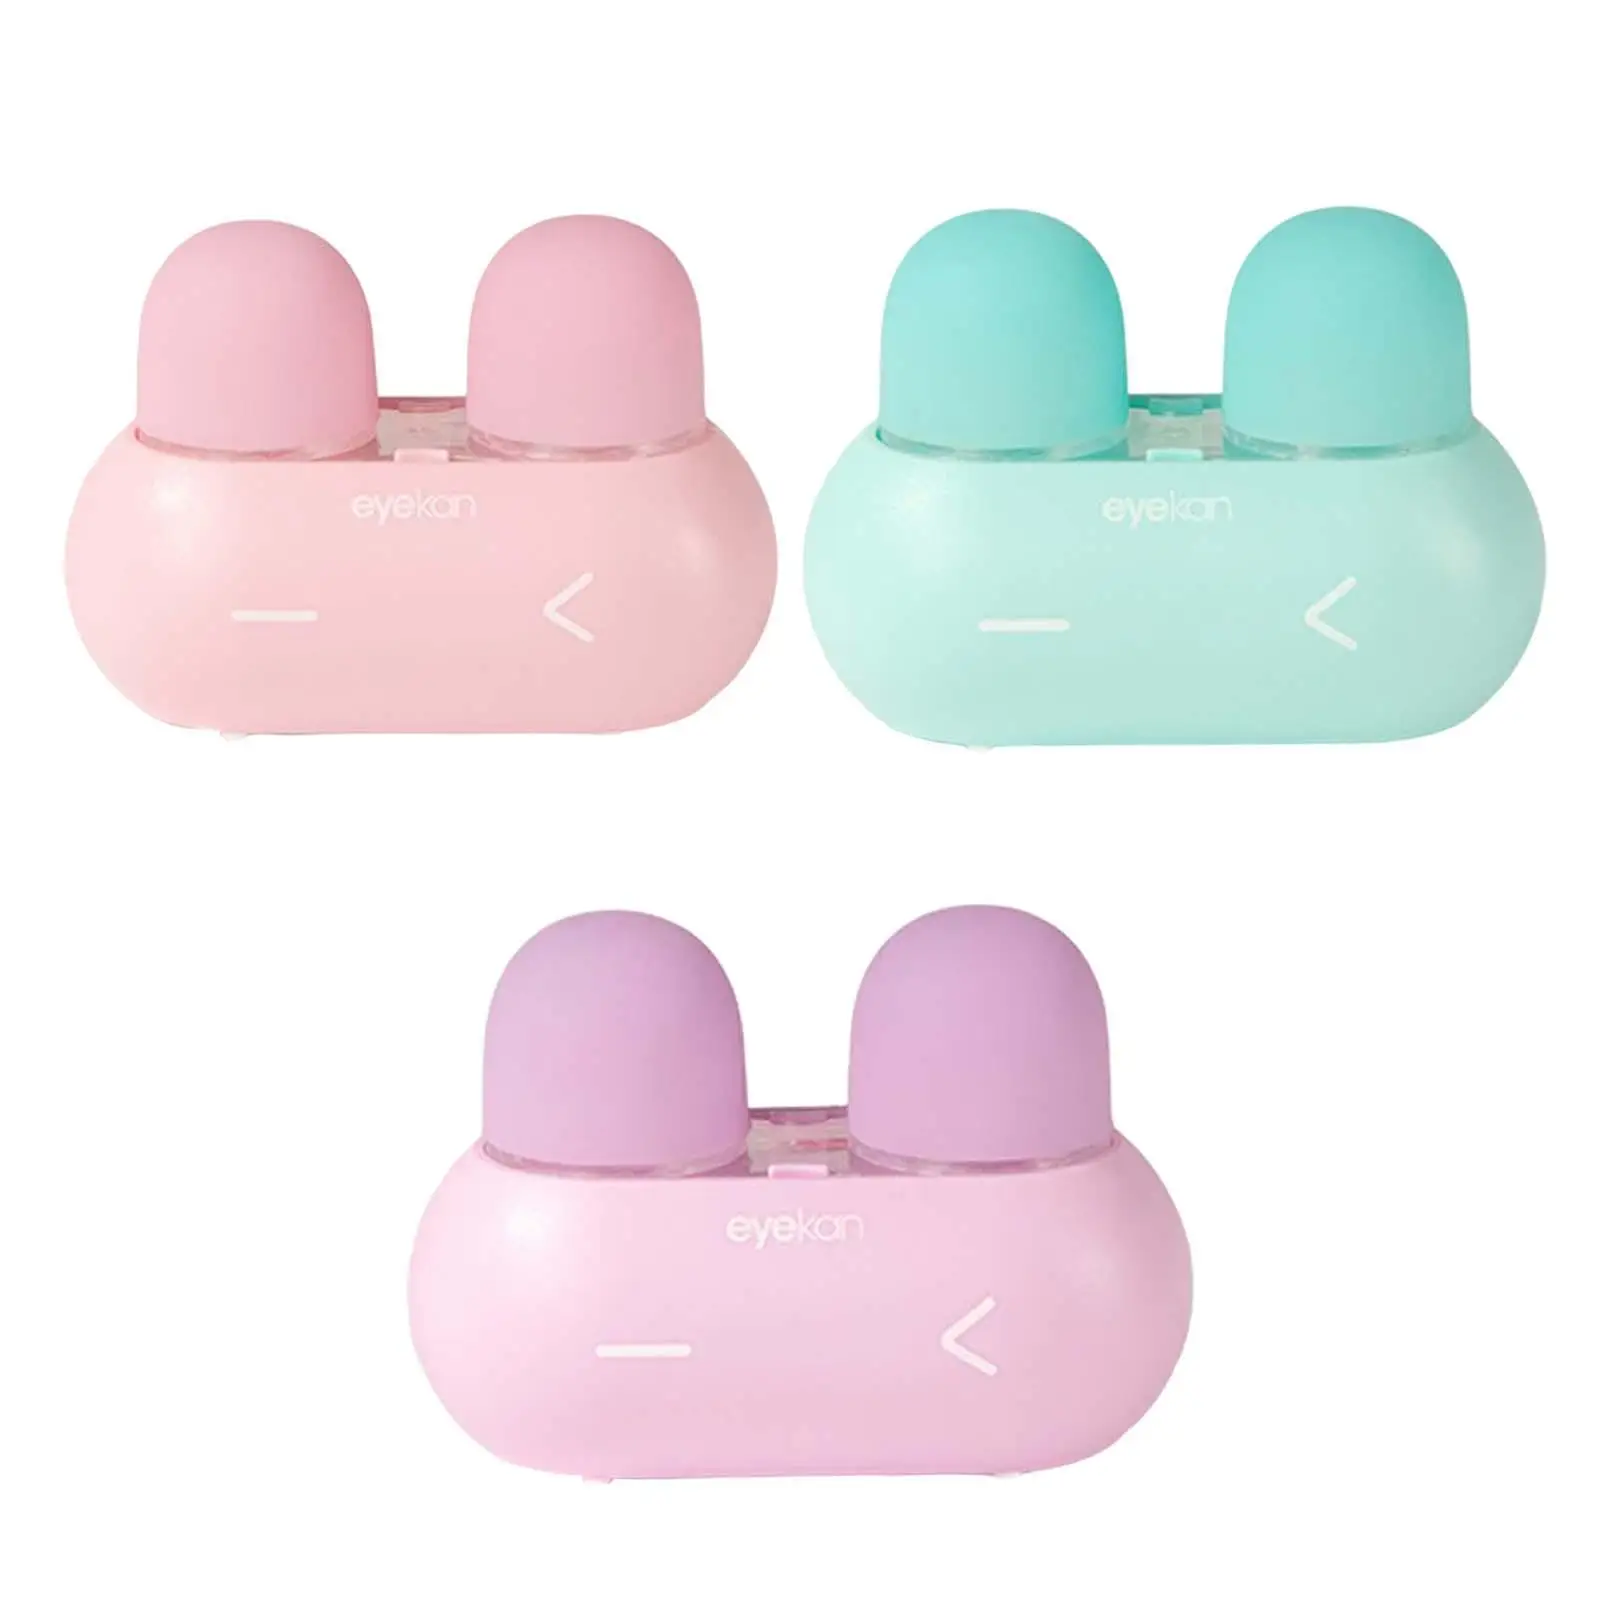 Cute Rabbit   Cleaner Container USB or AAA Battery